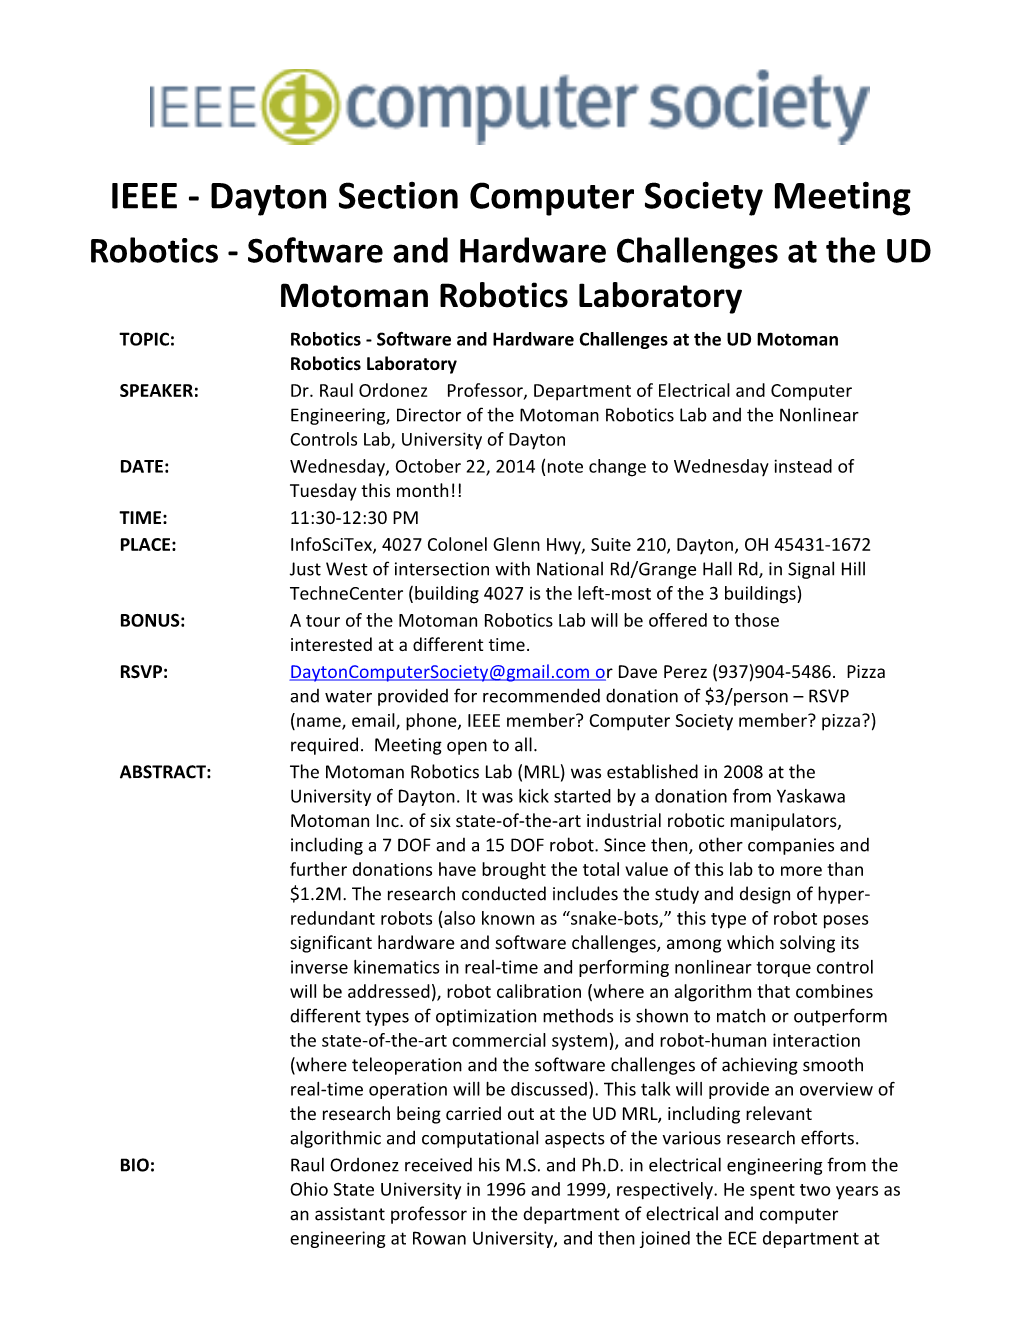 IEEE - Dayton Section Computer Society Meeting